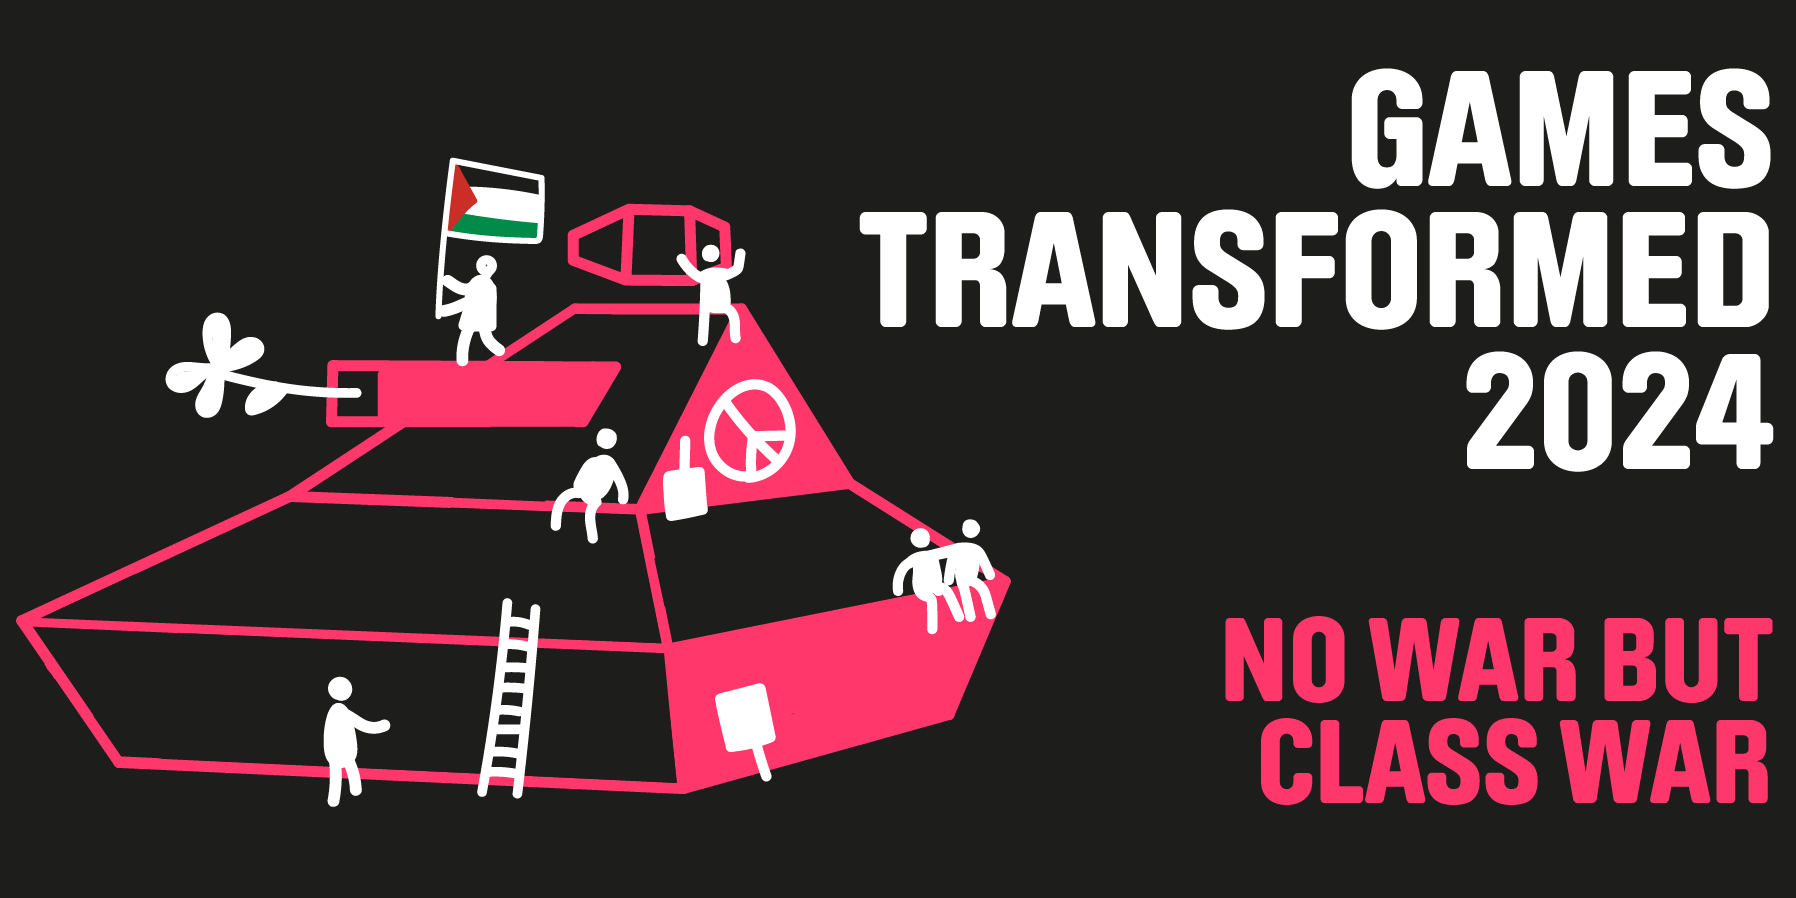 On a black baground the ilustrated outline of a tank in pink. Figures are climbing on it with flowers, CND symbols and a flag of Palestine. The text reads: Games Transformed 2024: No war but class war